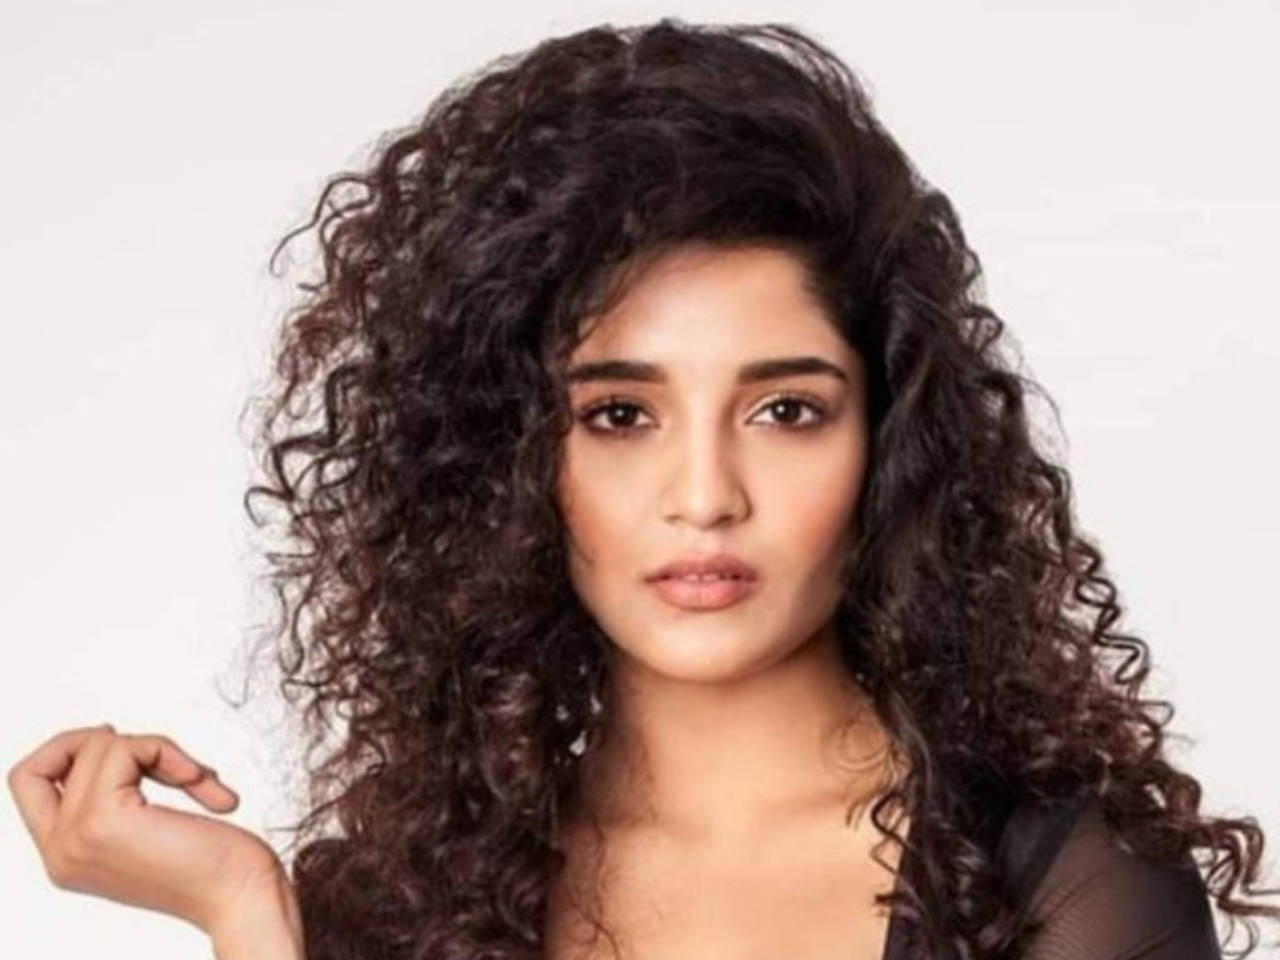 Oh My Kadavule actress Ritika Singh is basking in the love of her ...